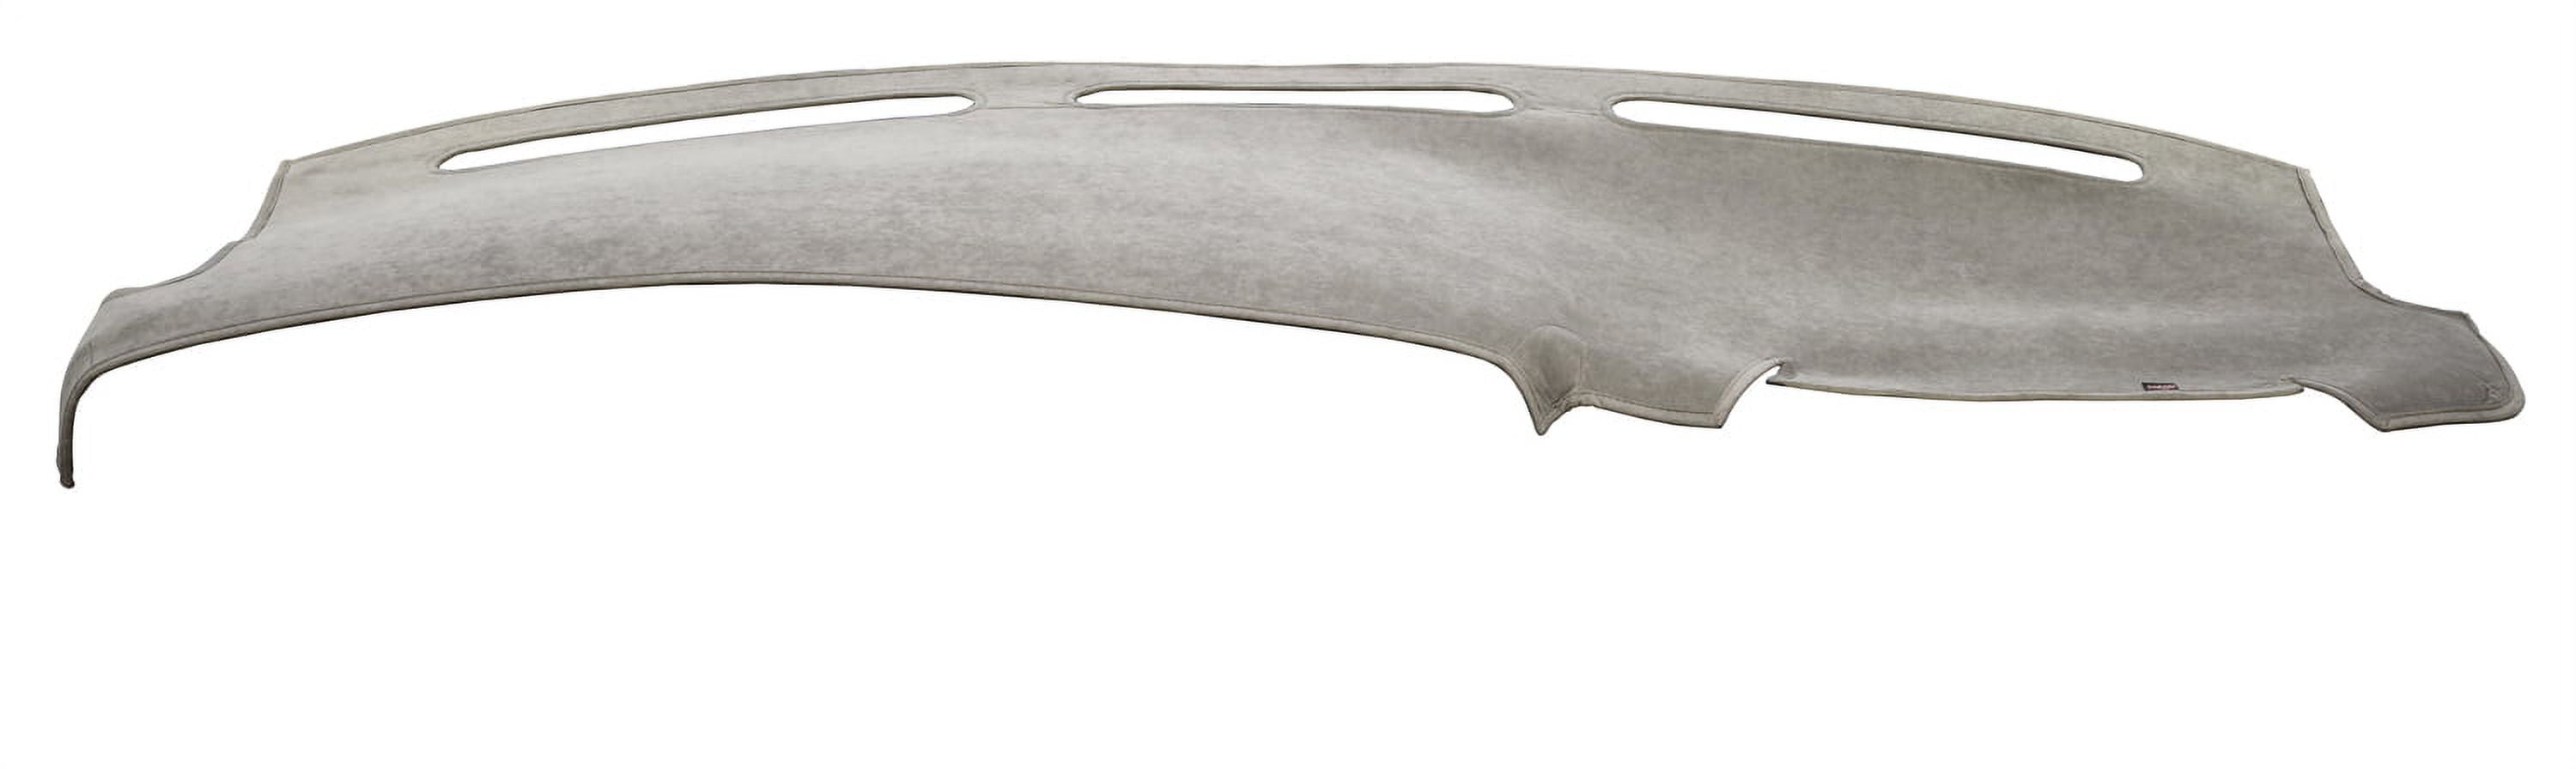 Covercraft SuedeMat Custom Dash Cover for Chrysler/Dodge/Plymouth Models  81043-00-47 Grey